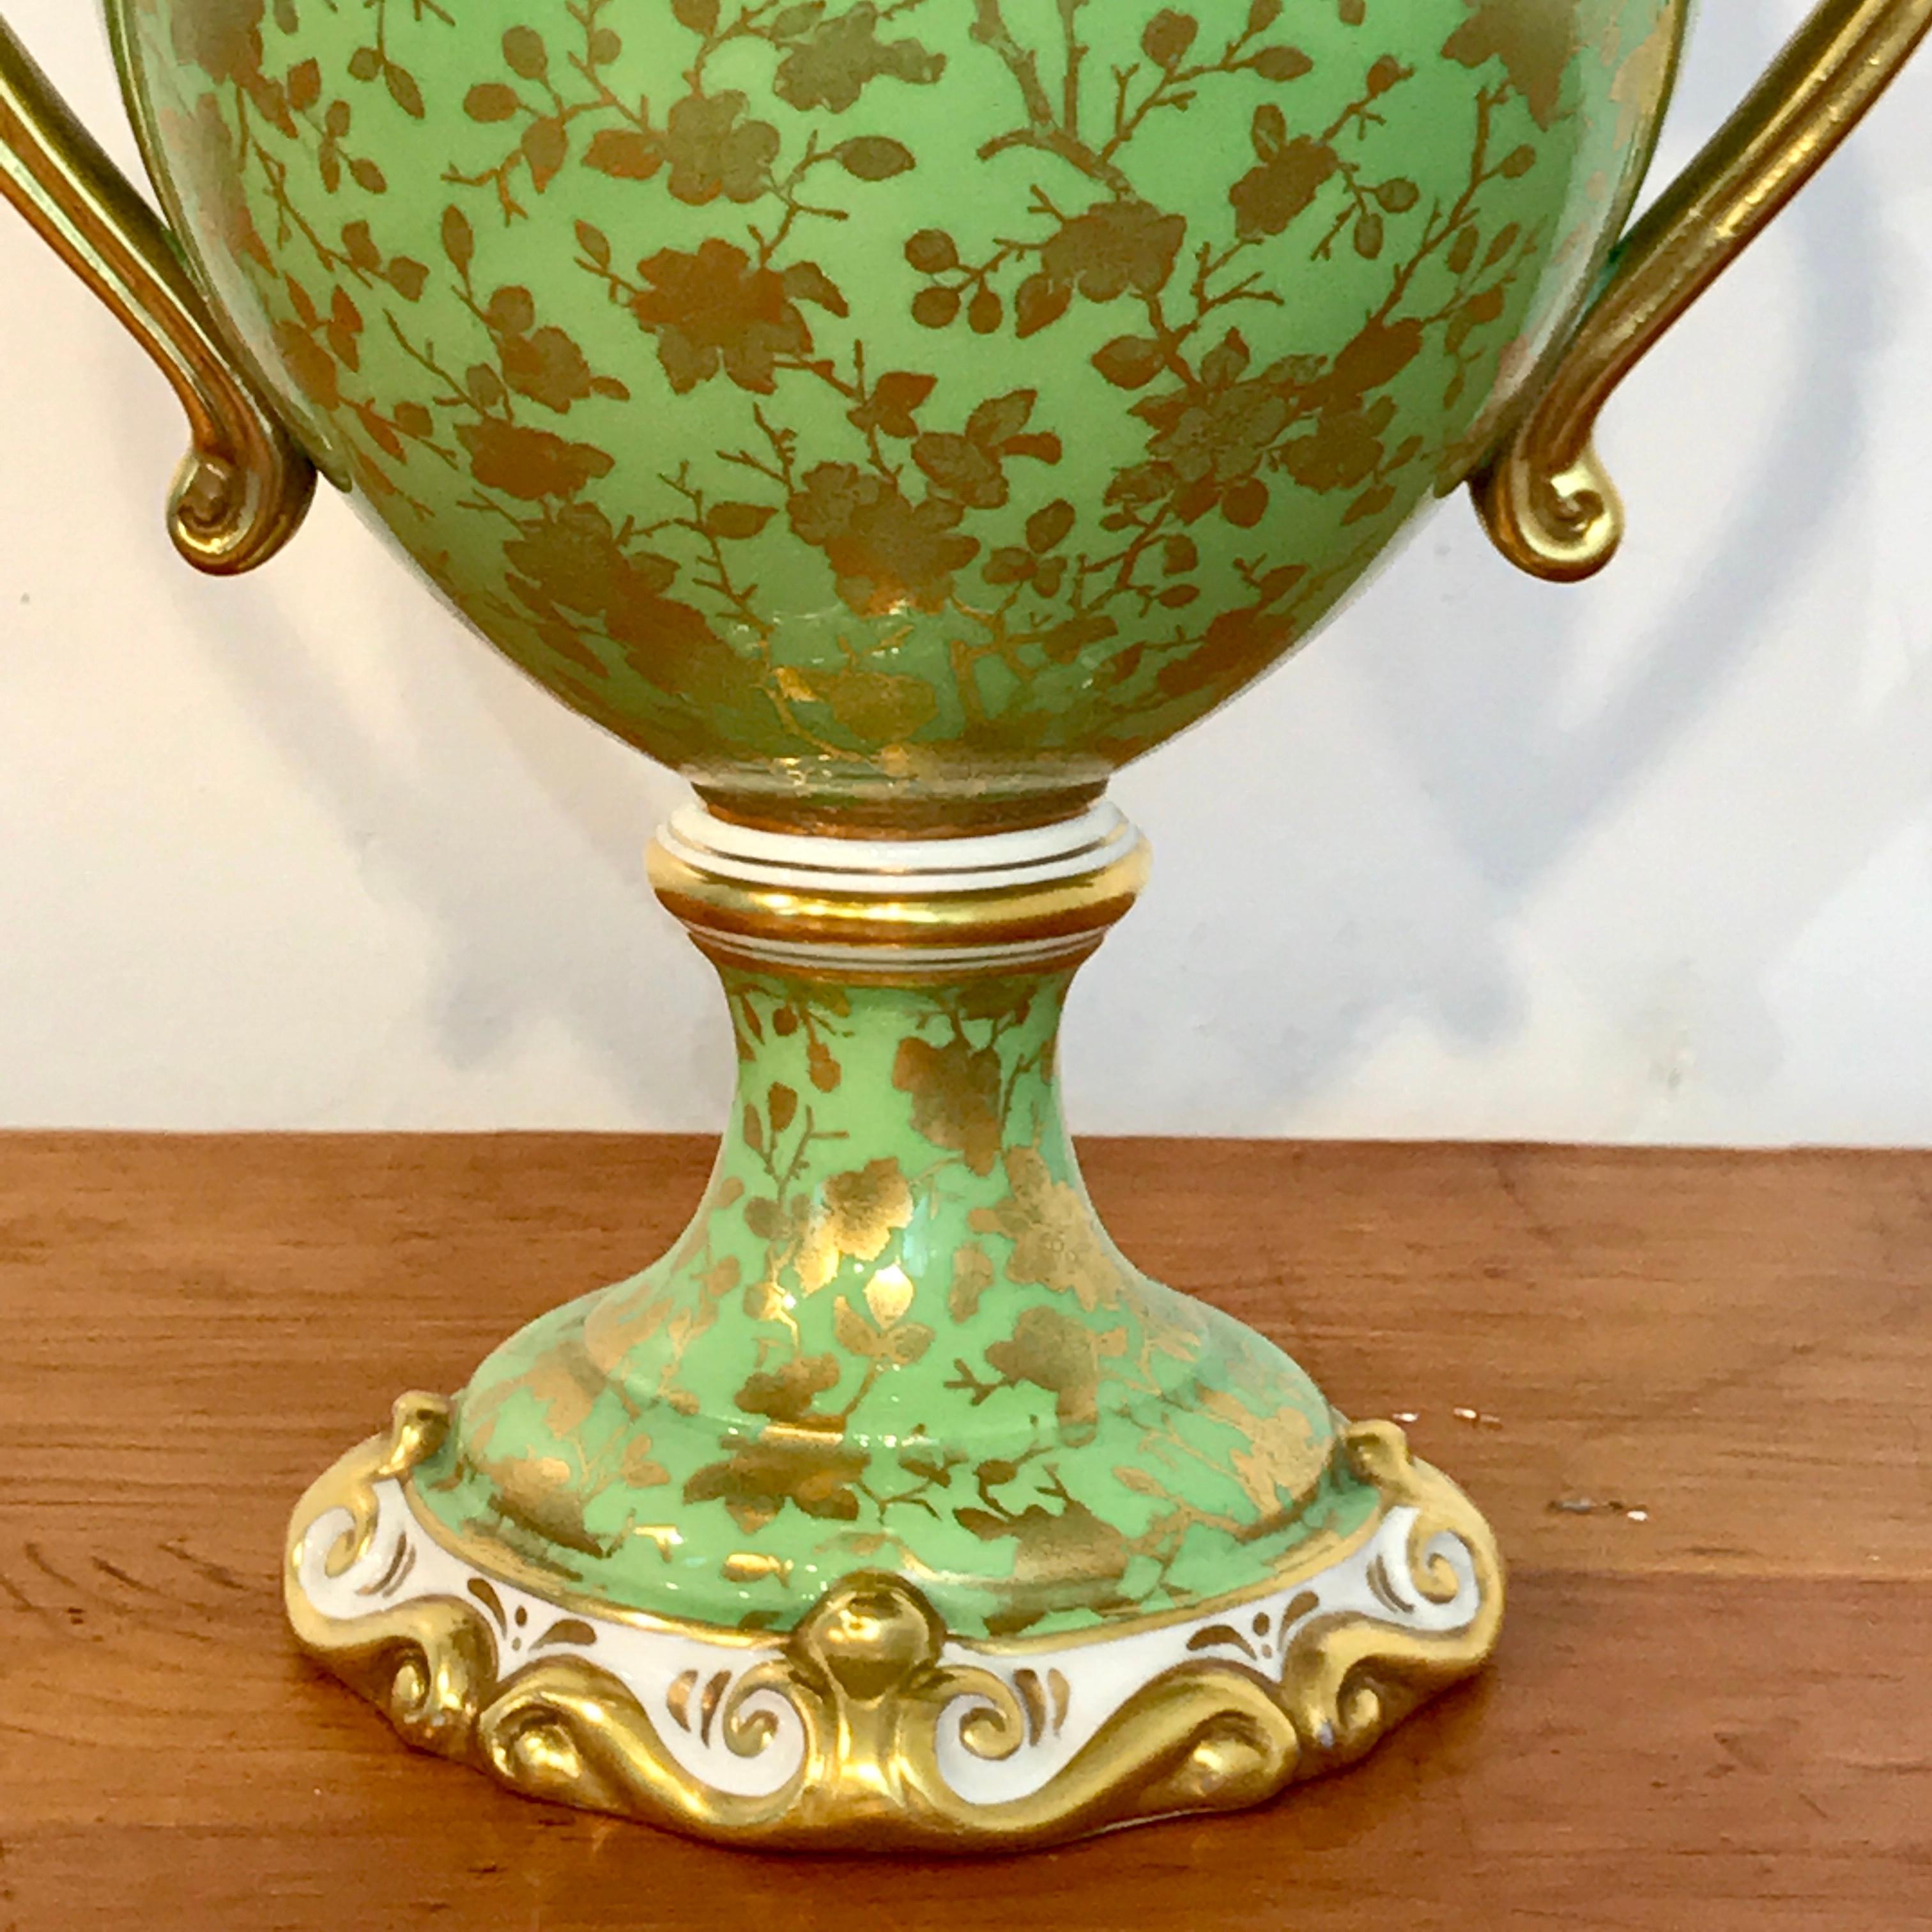 20th Century Coalport Covered Gilt Decorated Covered Urn